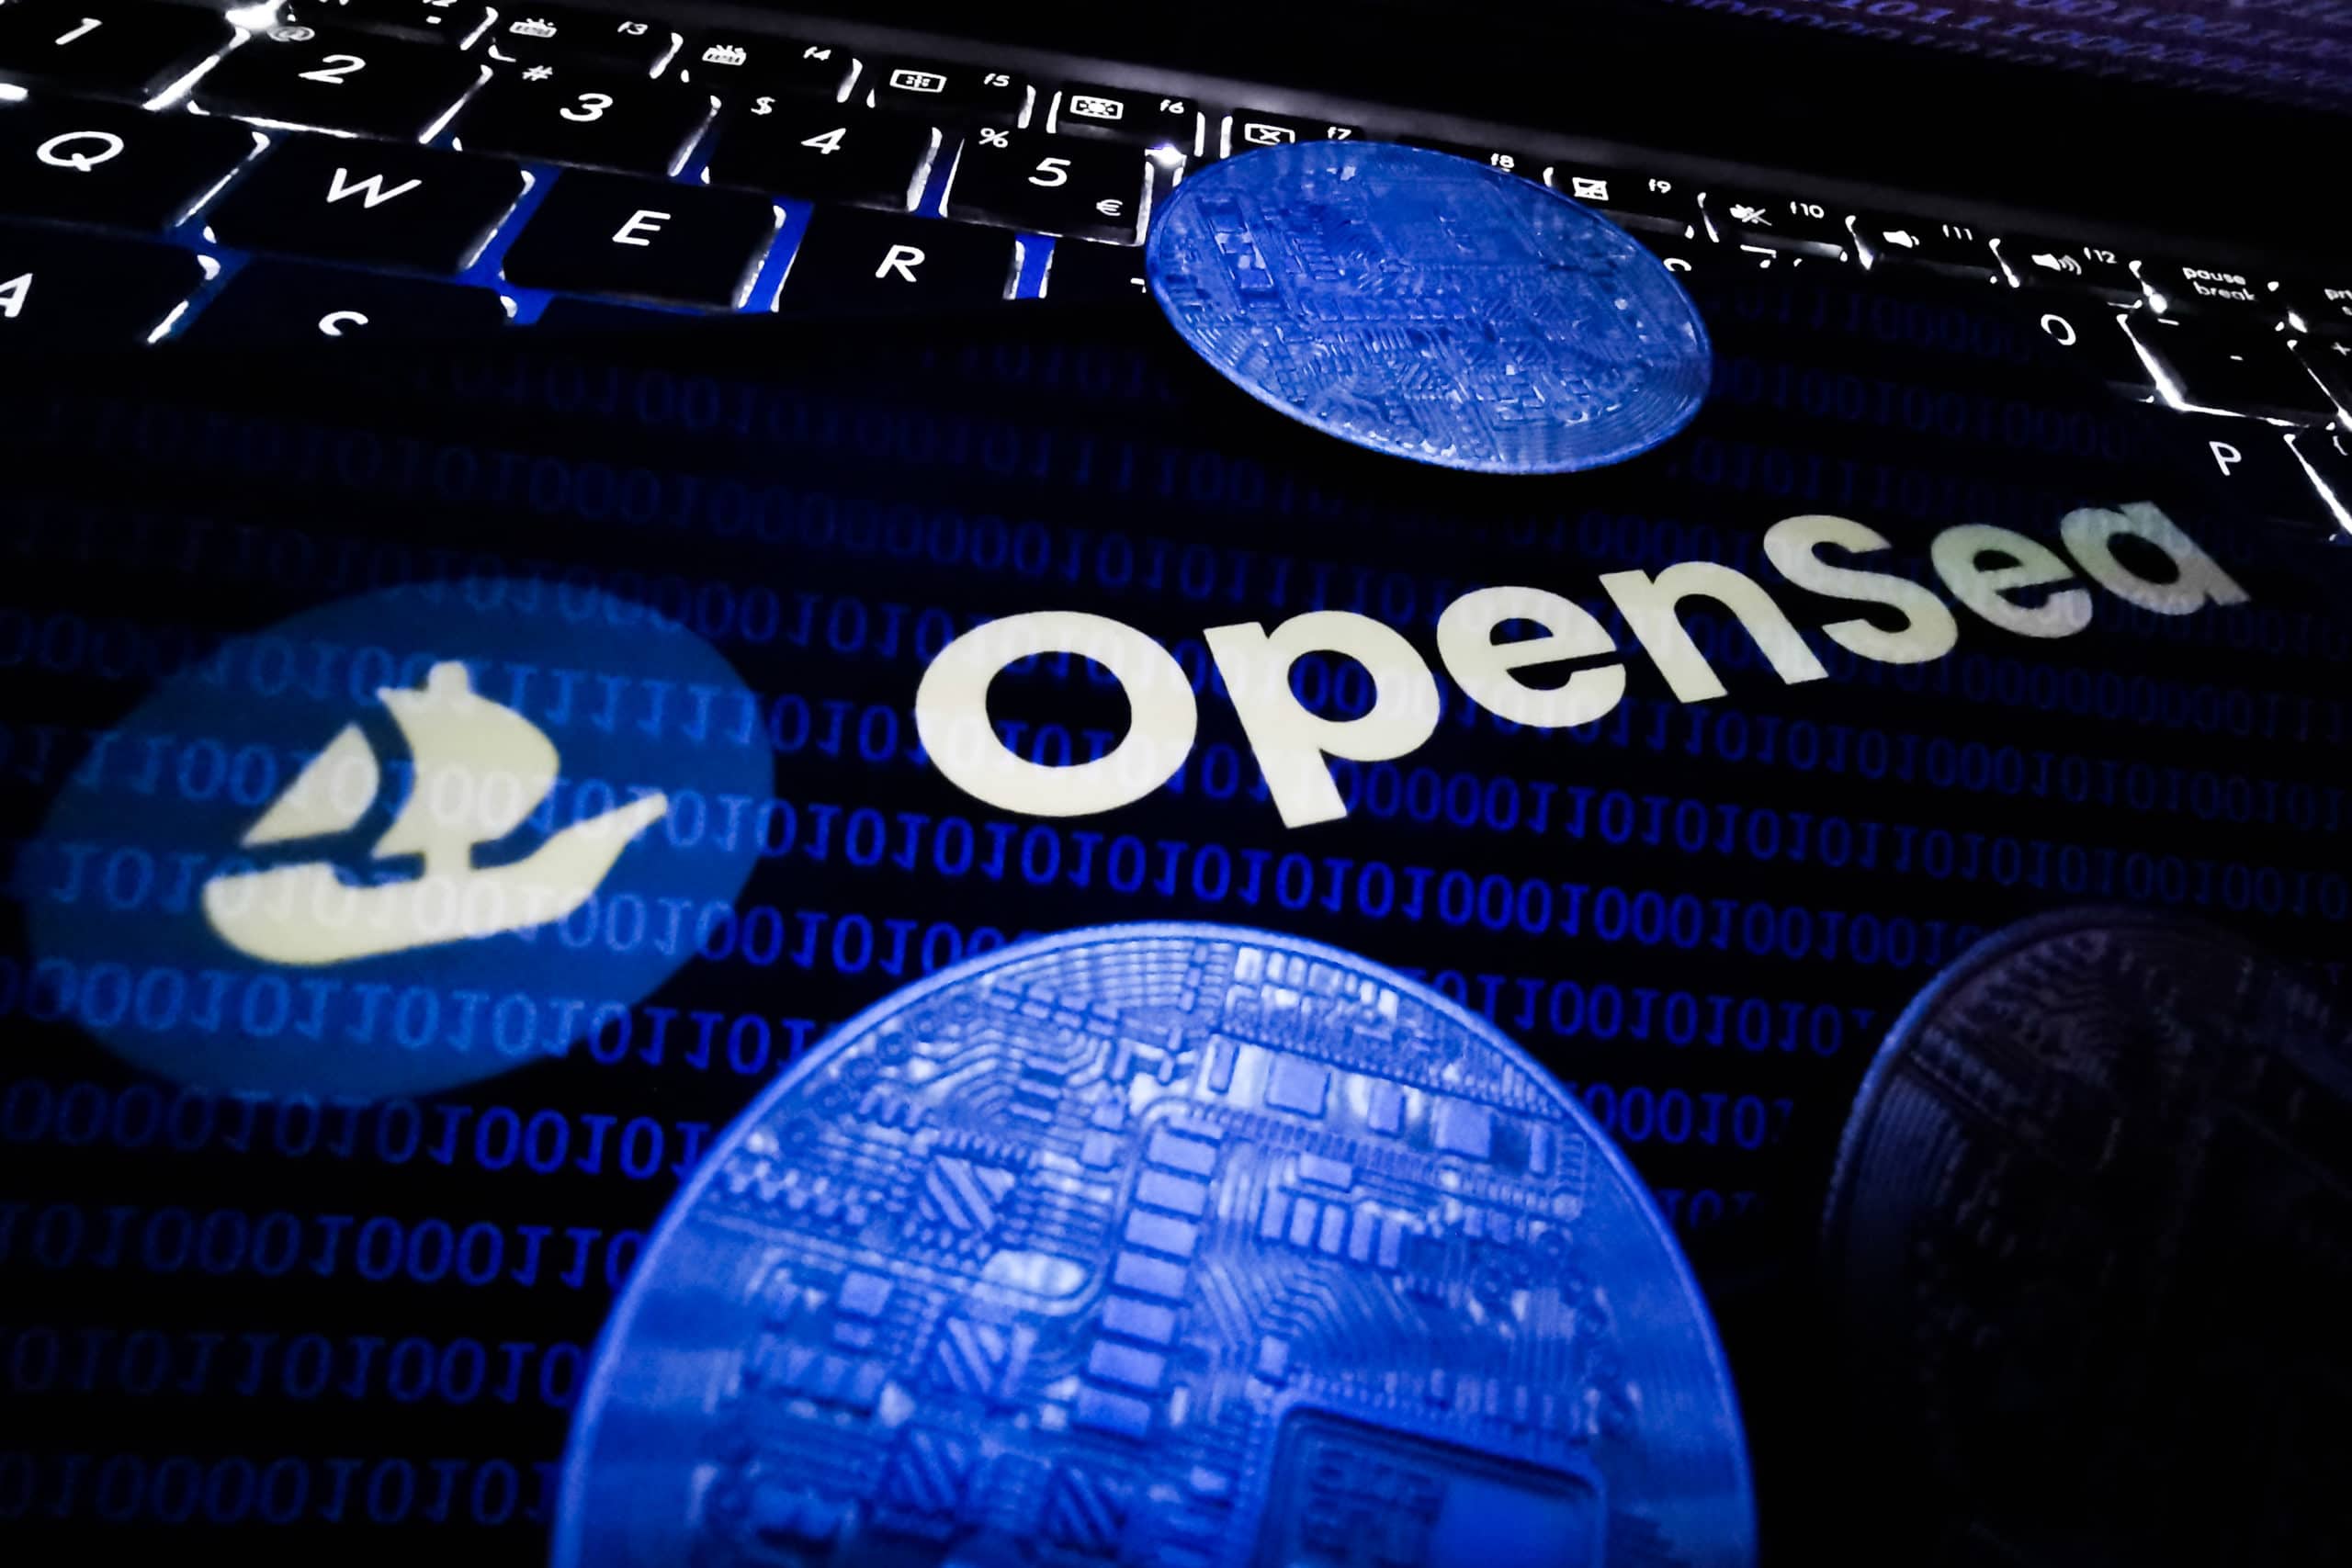 NFT Marketplace OpenSea Hit by a Major Email Data Breach